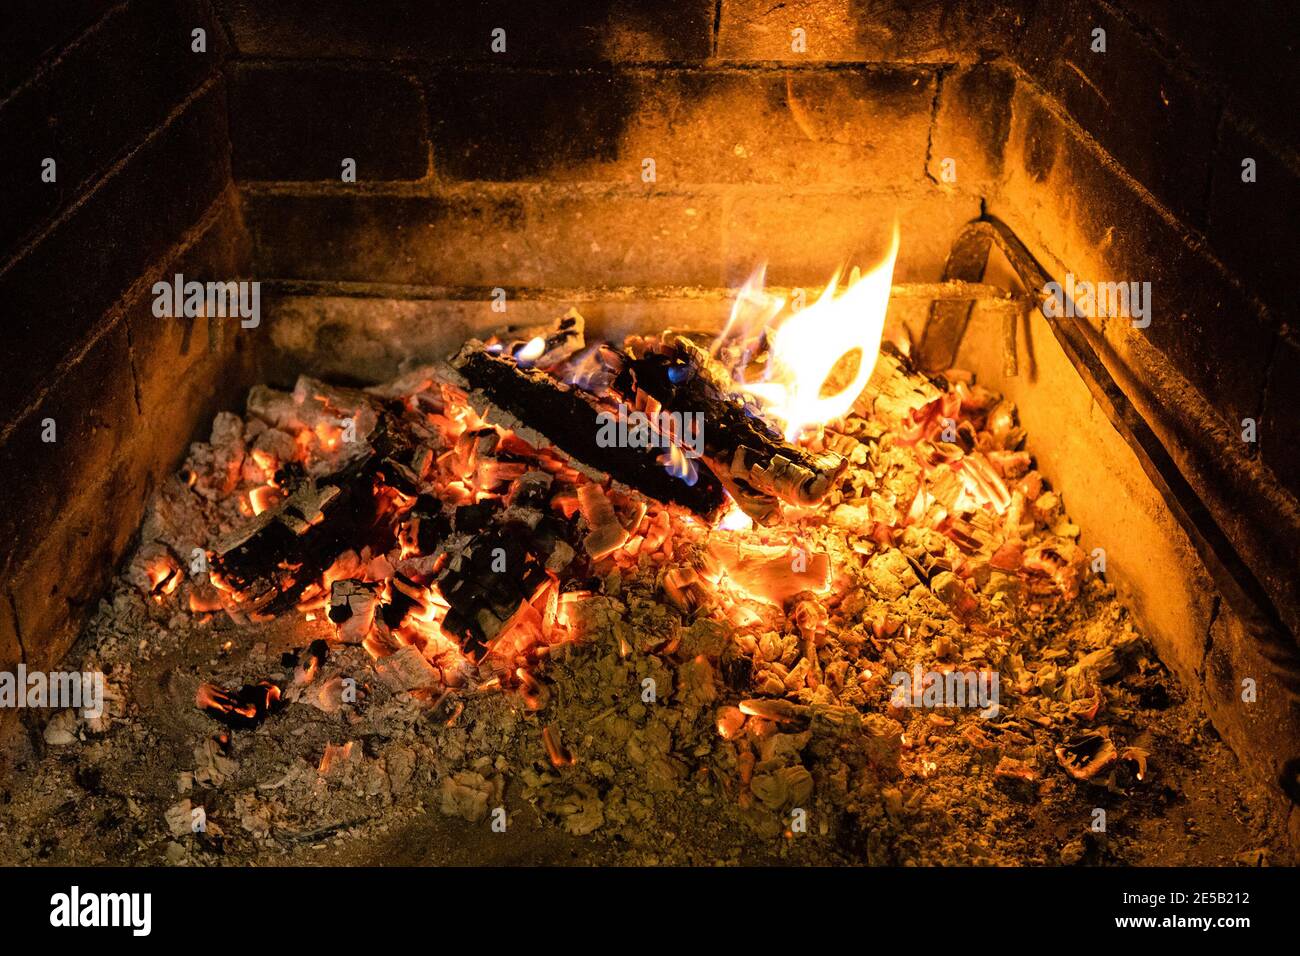 smoldering firewood and hot ash in home fireplace Stock Photo